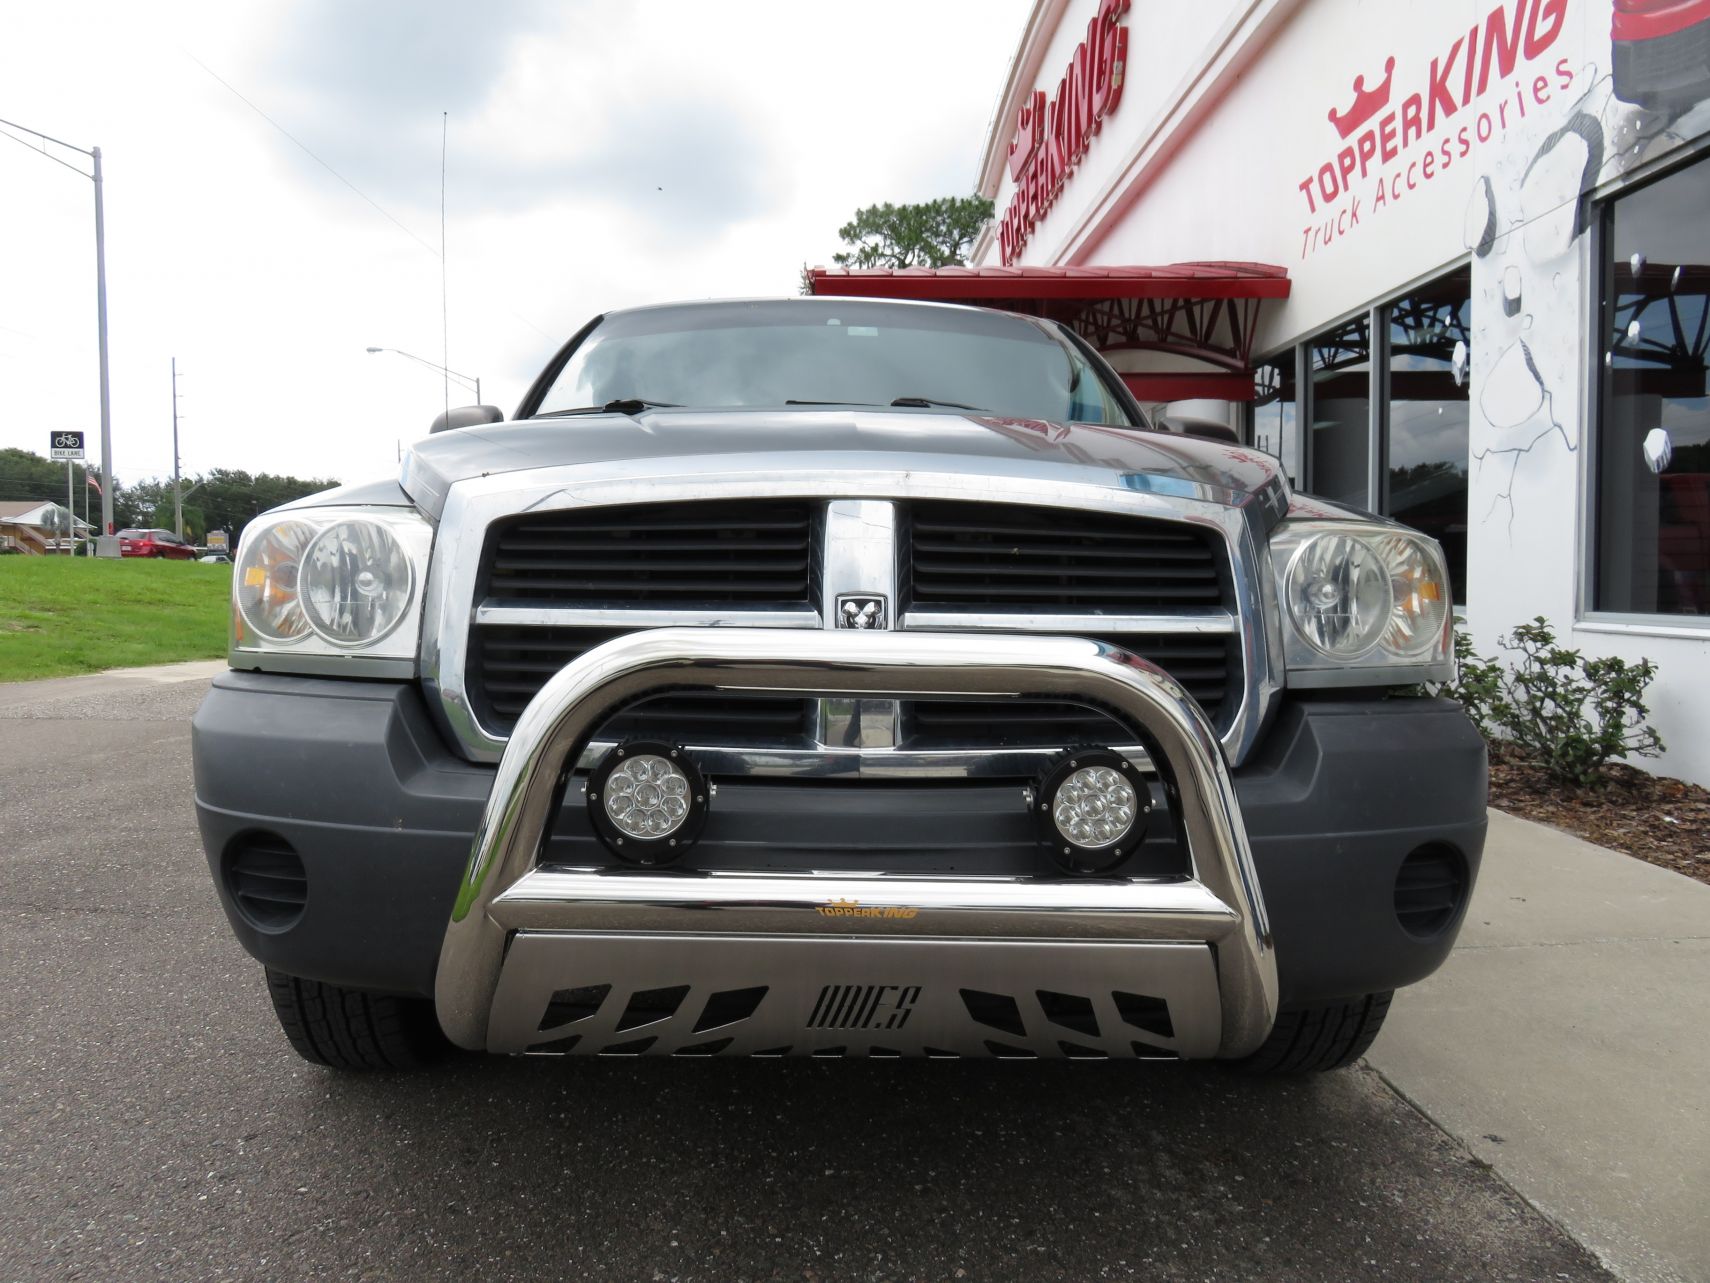 Dodge Dakota LEER 180 Looks New Again - TopperKING : TopperKING | Providing  all of Tampa Bay with quality truck accessories